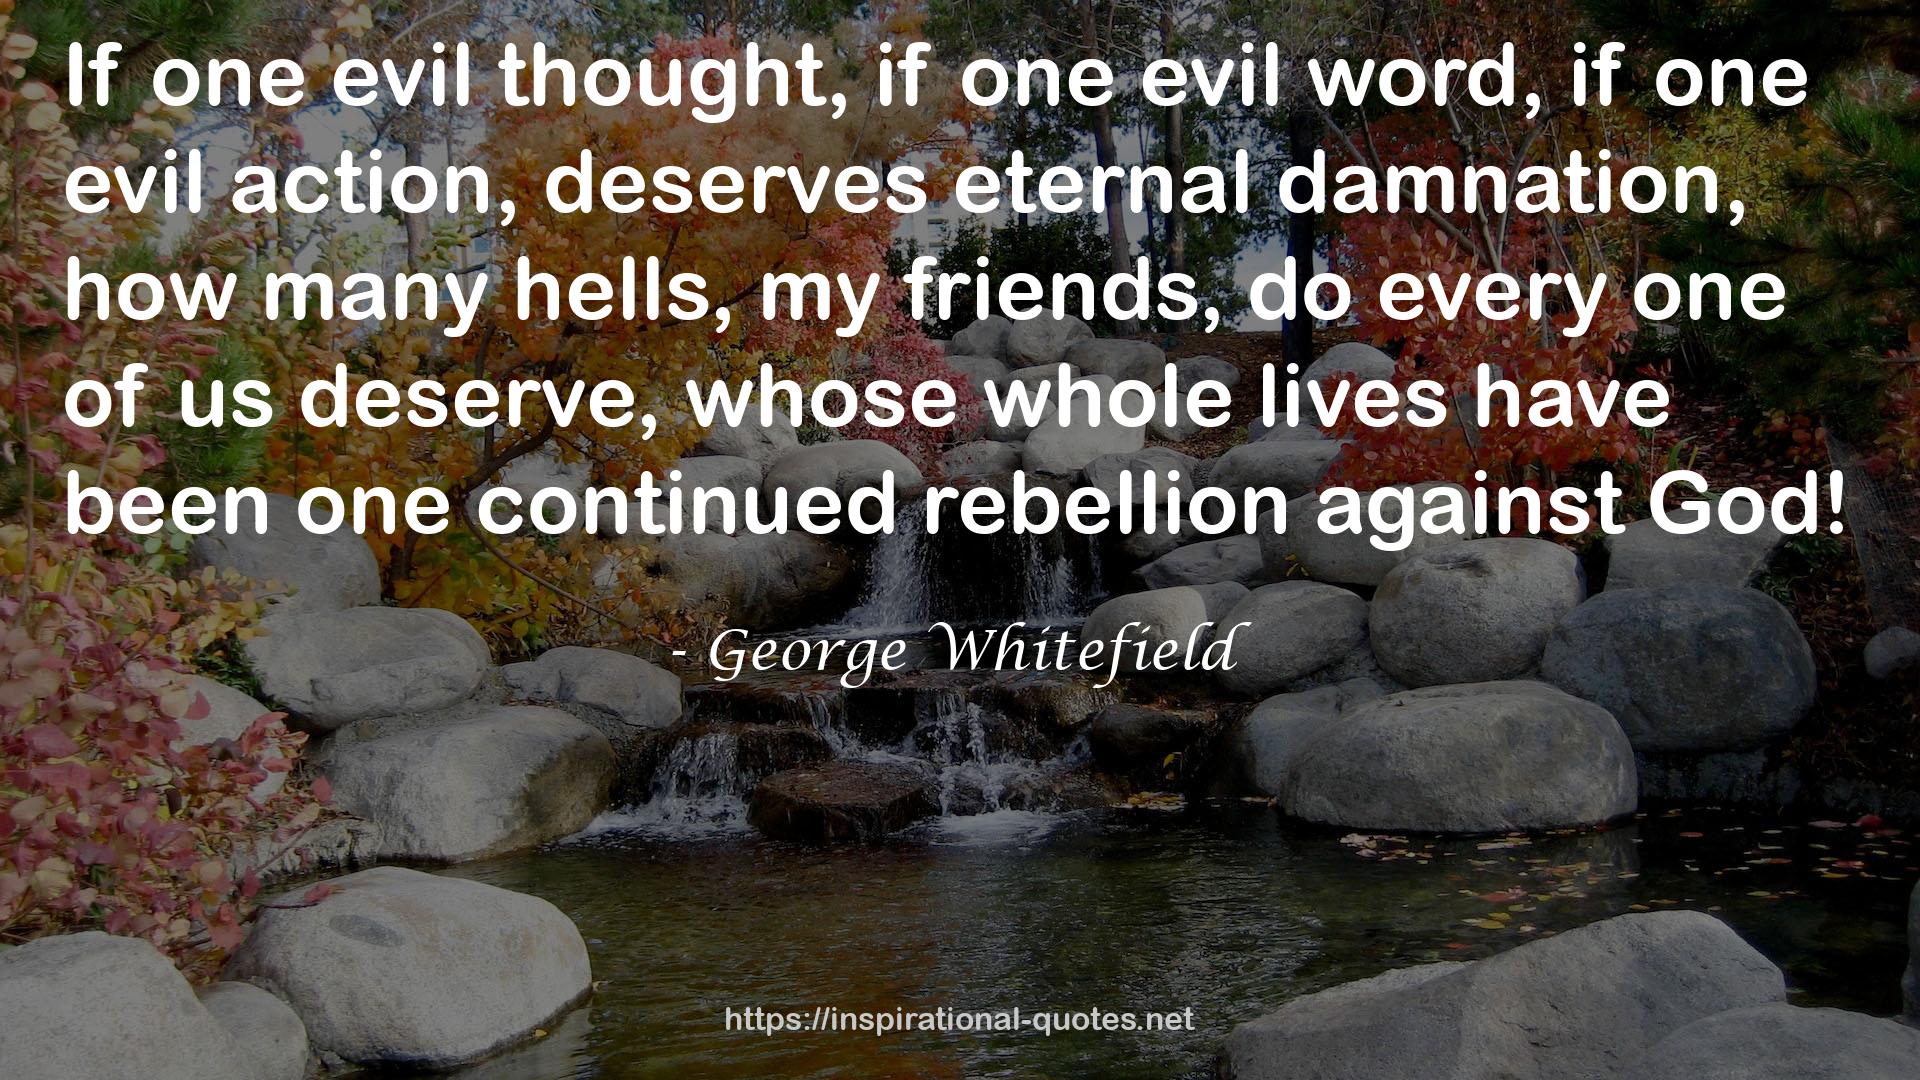 George Whitefield QUOTES